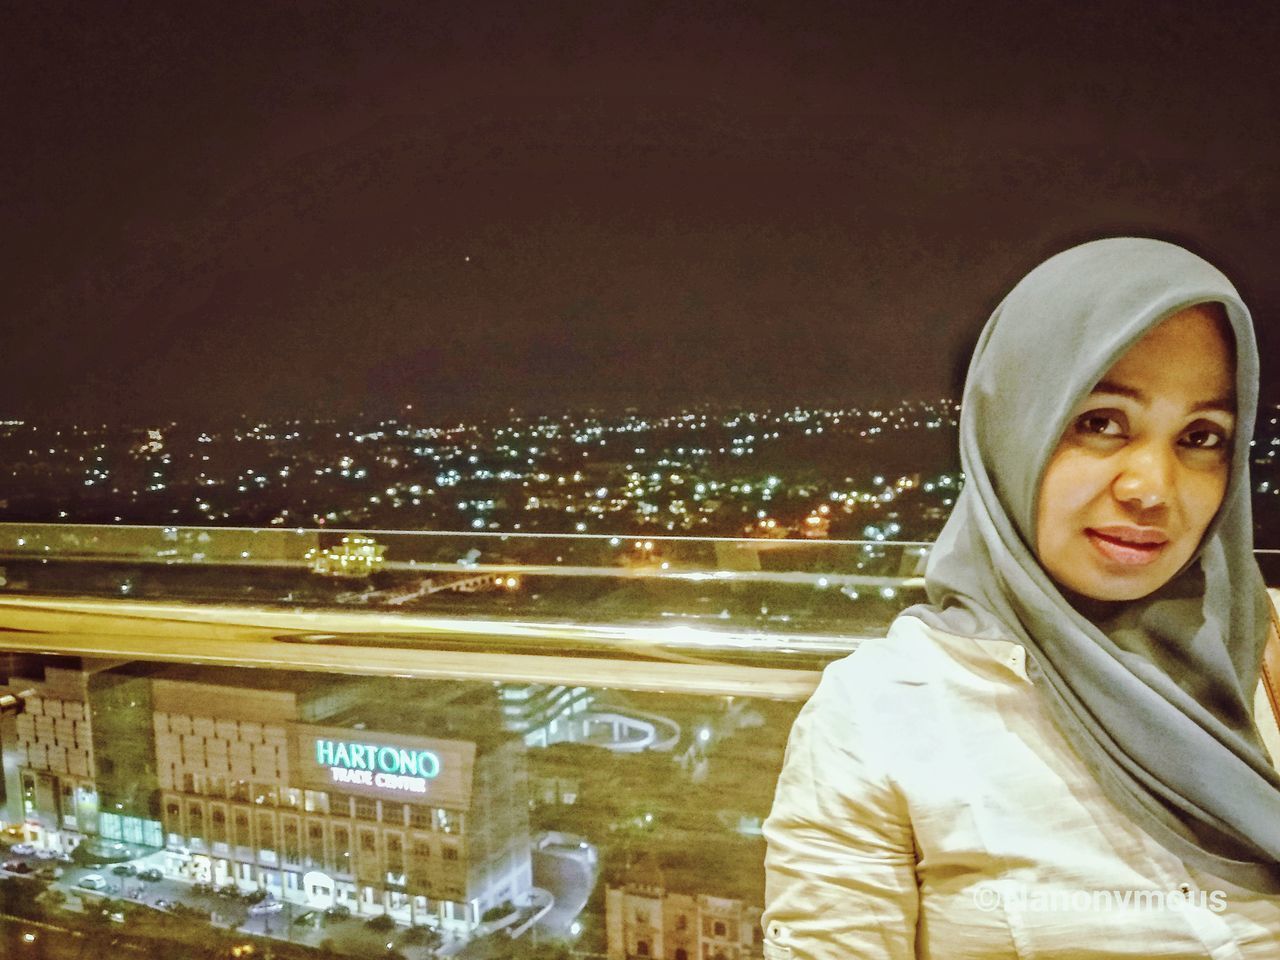 PORTRAIT OF YOUNG WOMAN WITH ILLUMINATED CITYSCAPE IN BACKGROUND